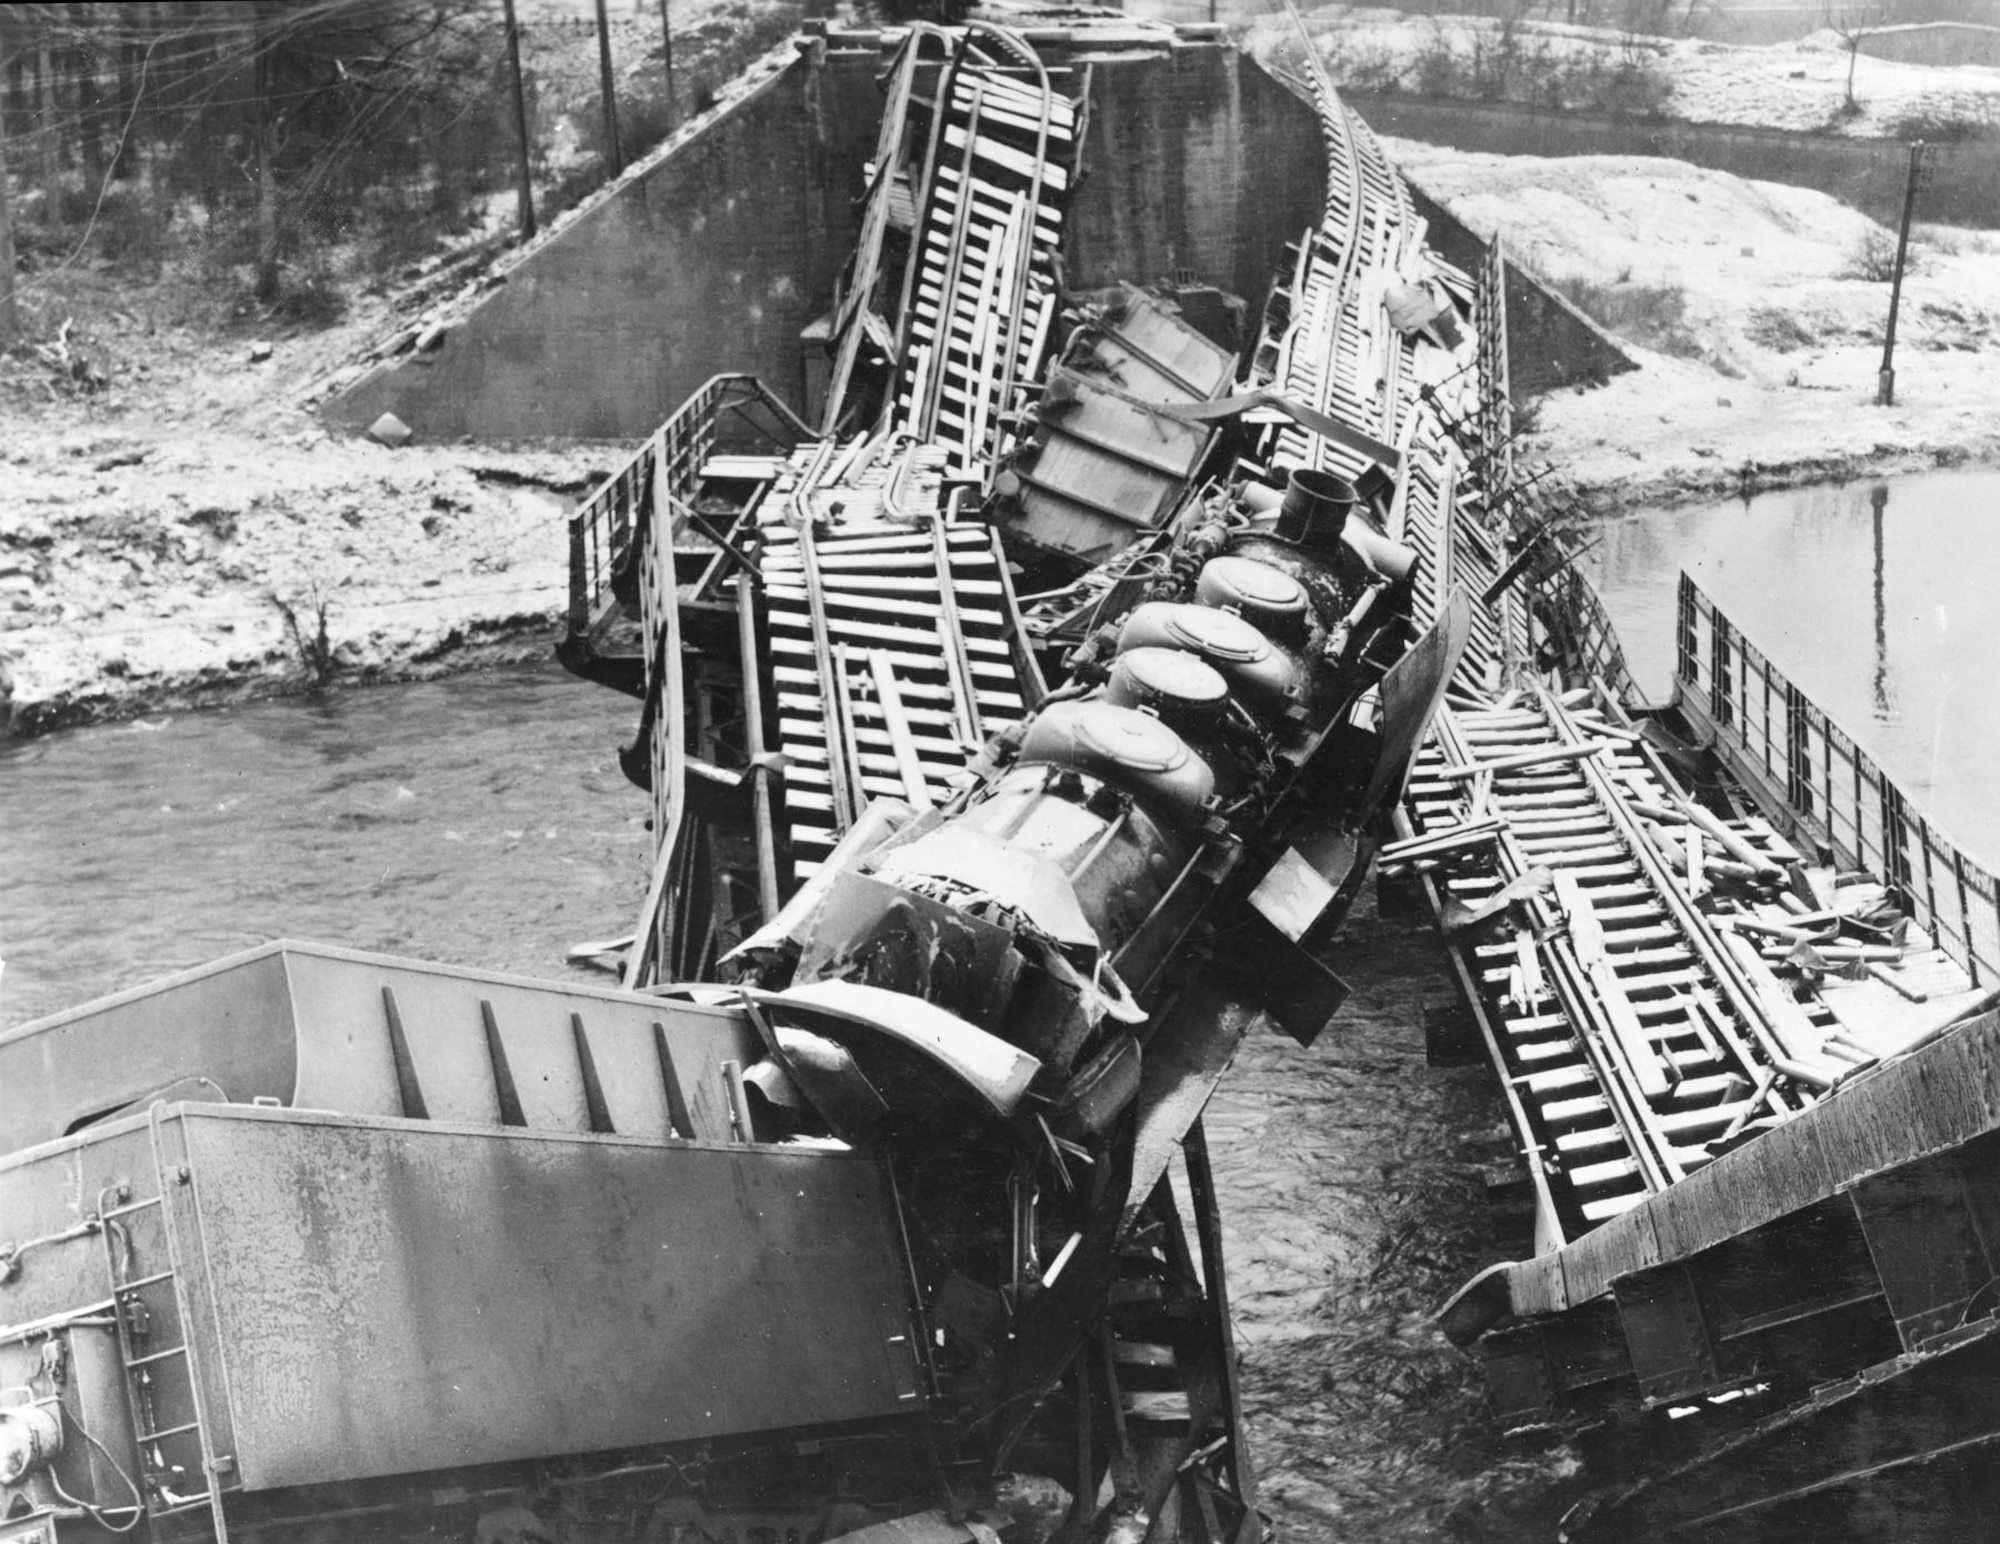 9th Air Force fighter-bombers caught this train trying to cross the Moselle River and destroyed both it and the bridge it was on. (U.S. Air Force photo)